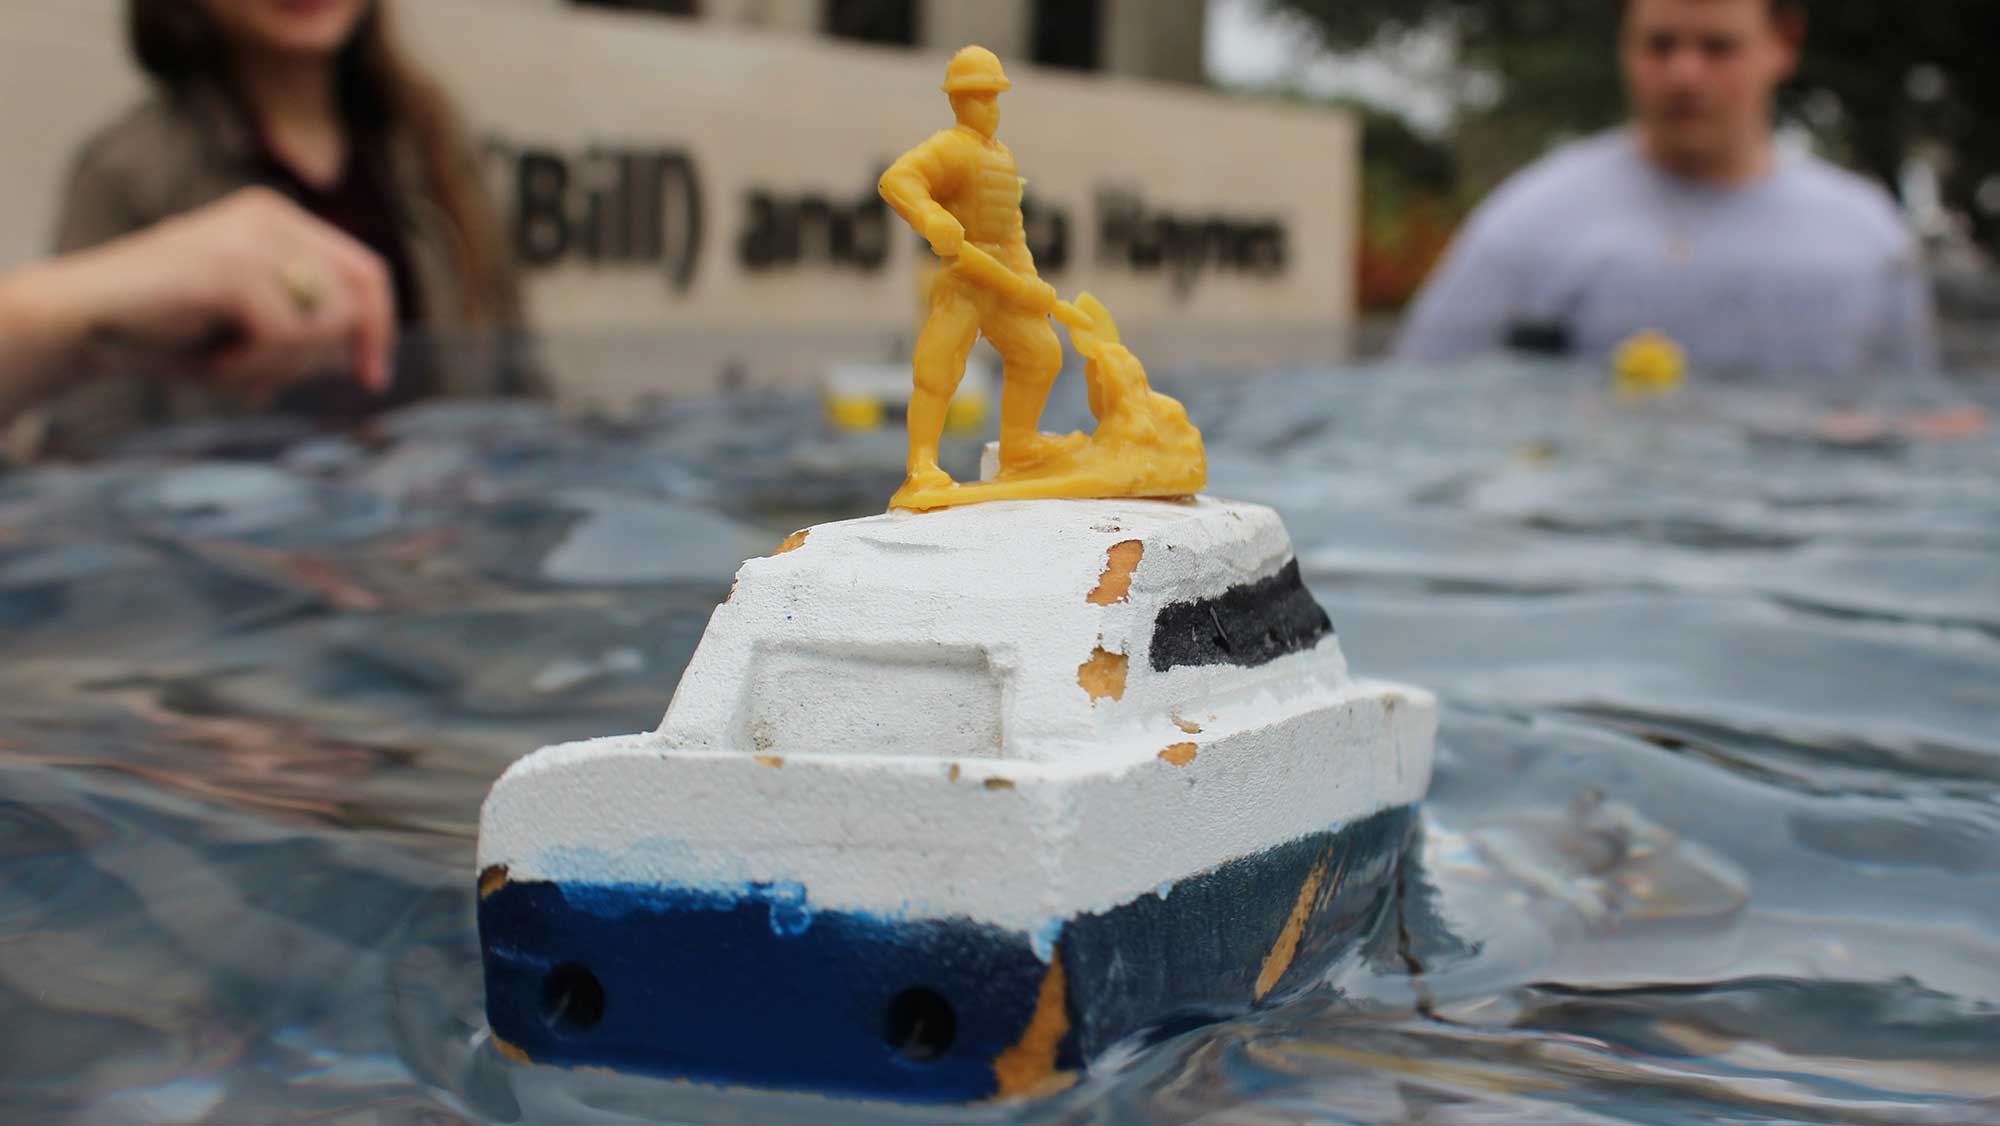 ocean engineering student organization demonstrates OCEN concepts using a pool and model boat